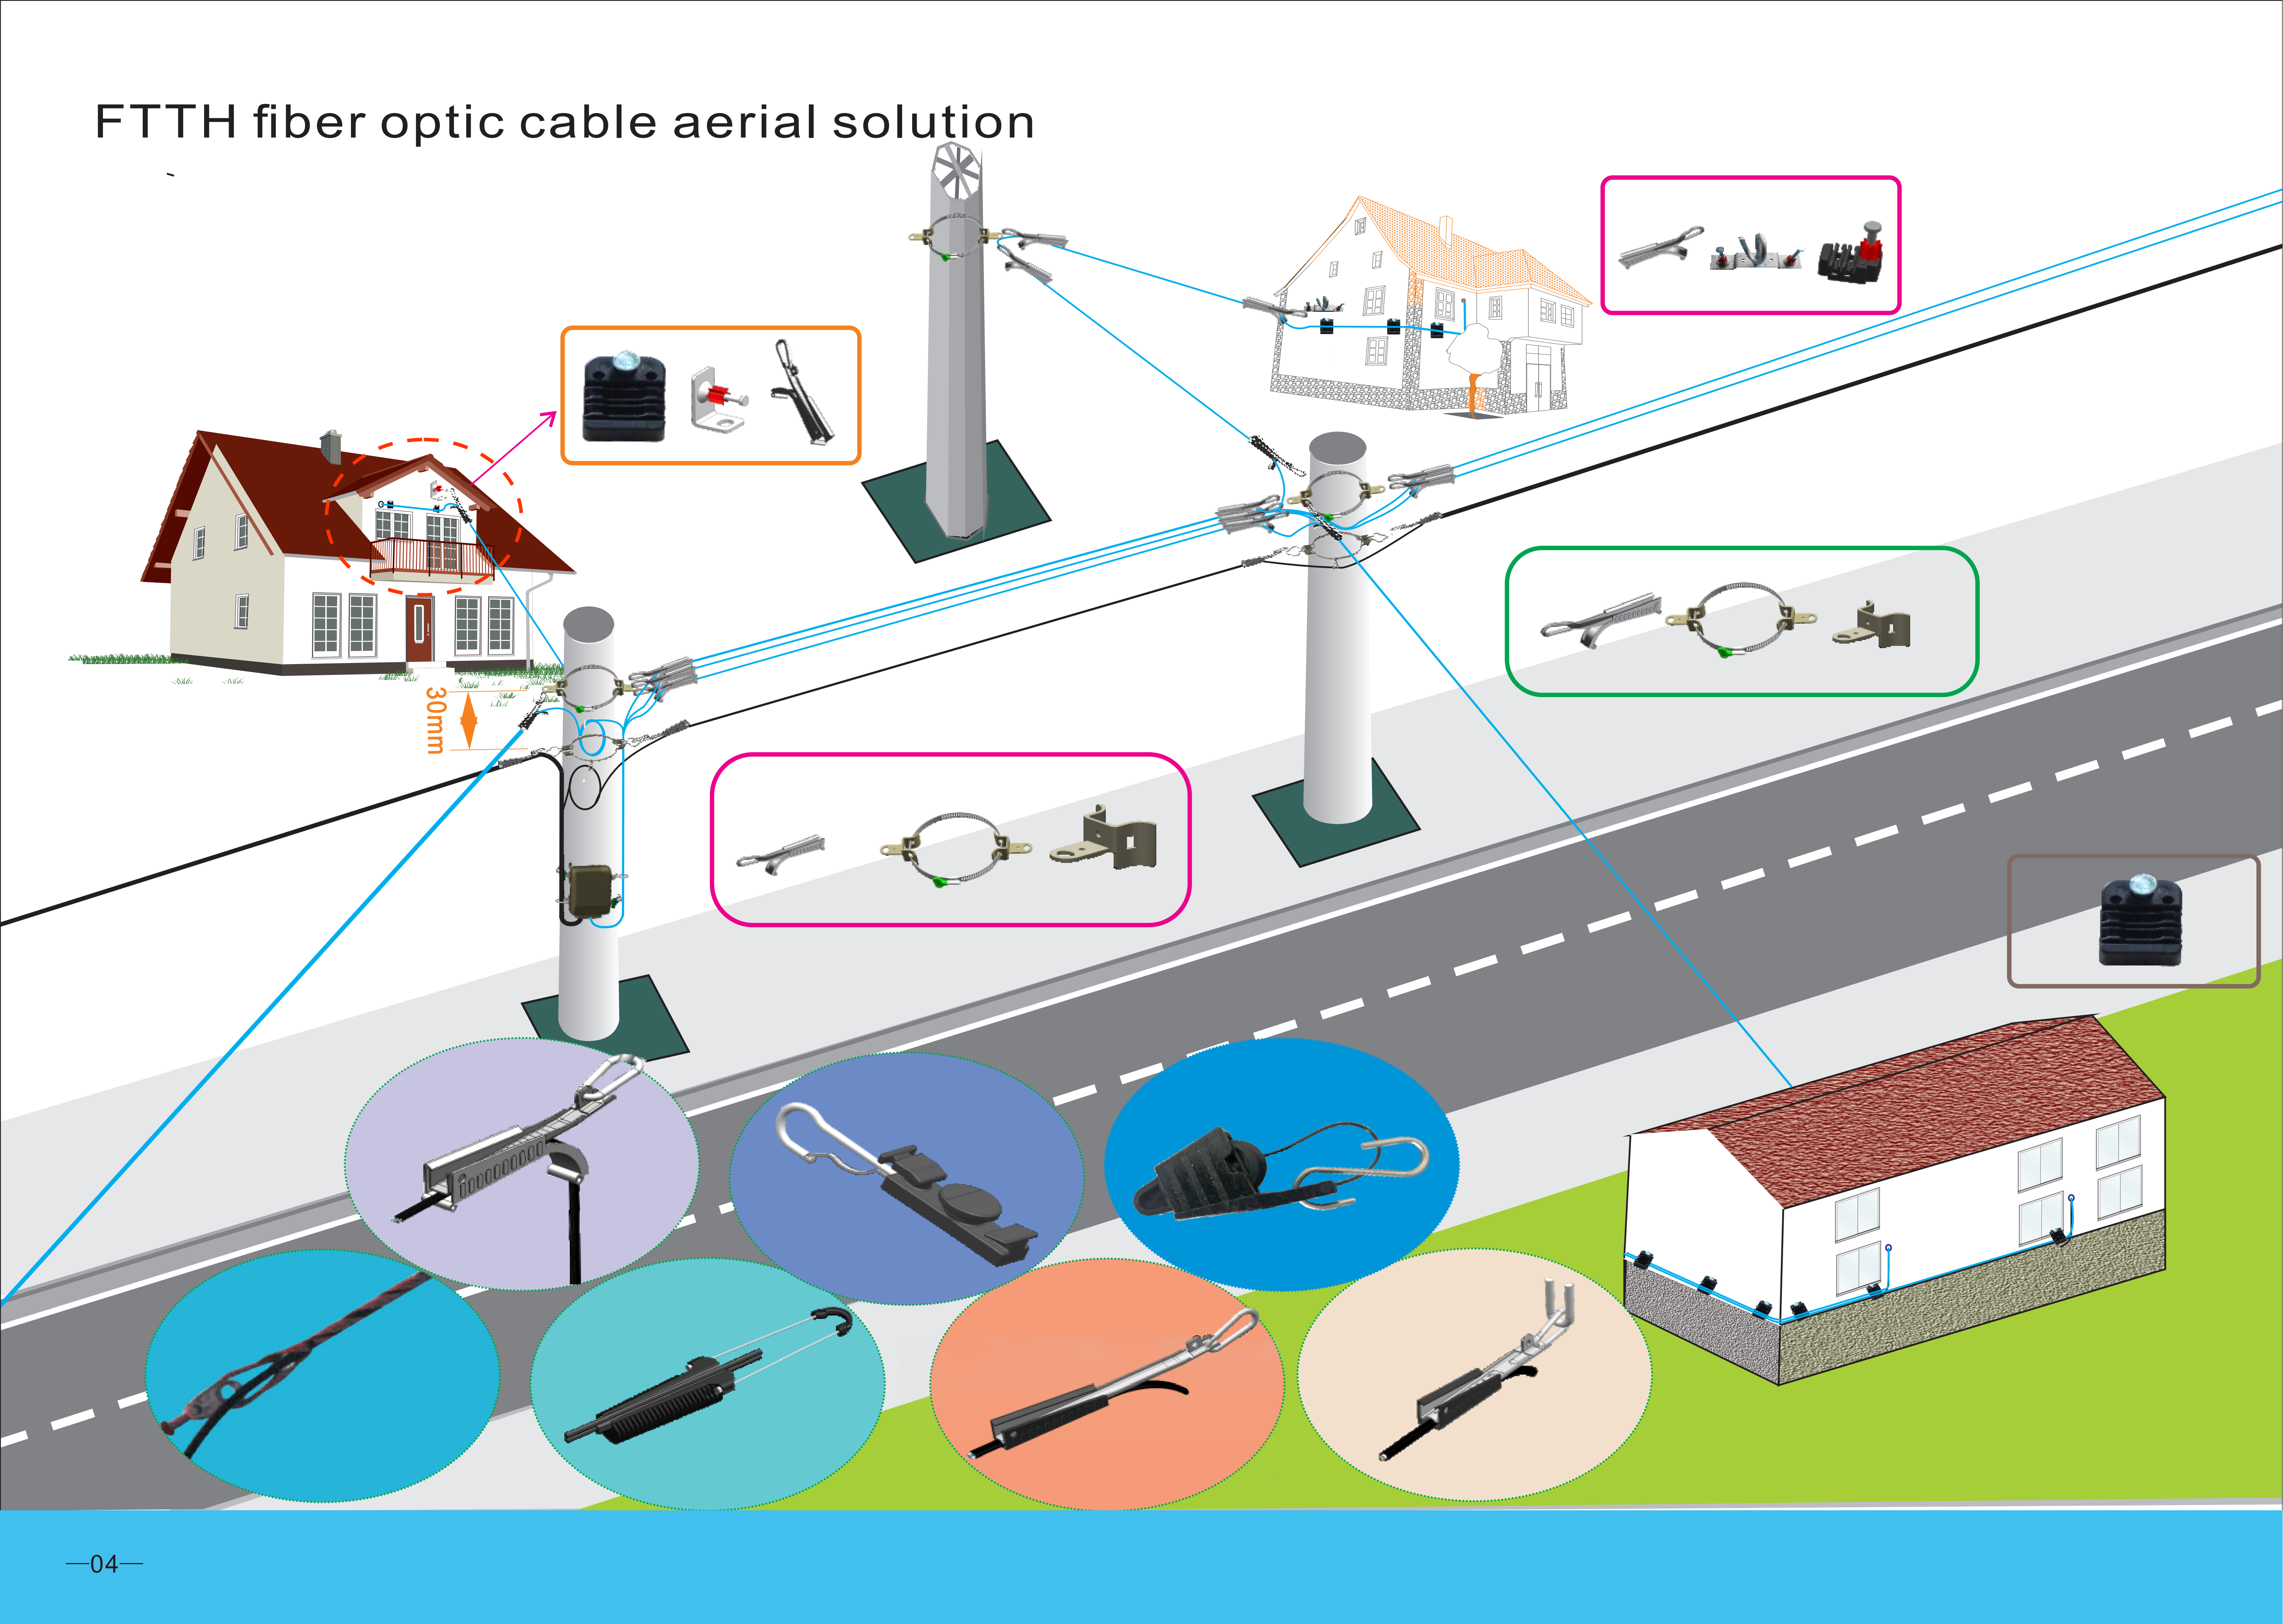 FCST-Aerial Cable Installation Solution